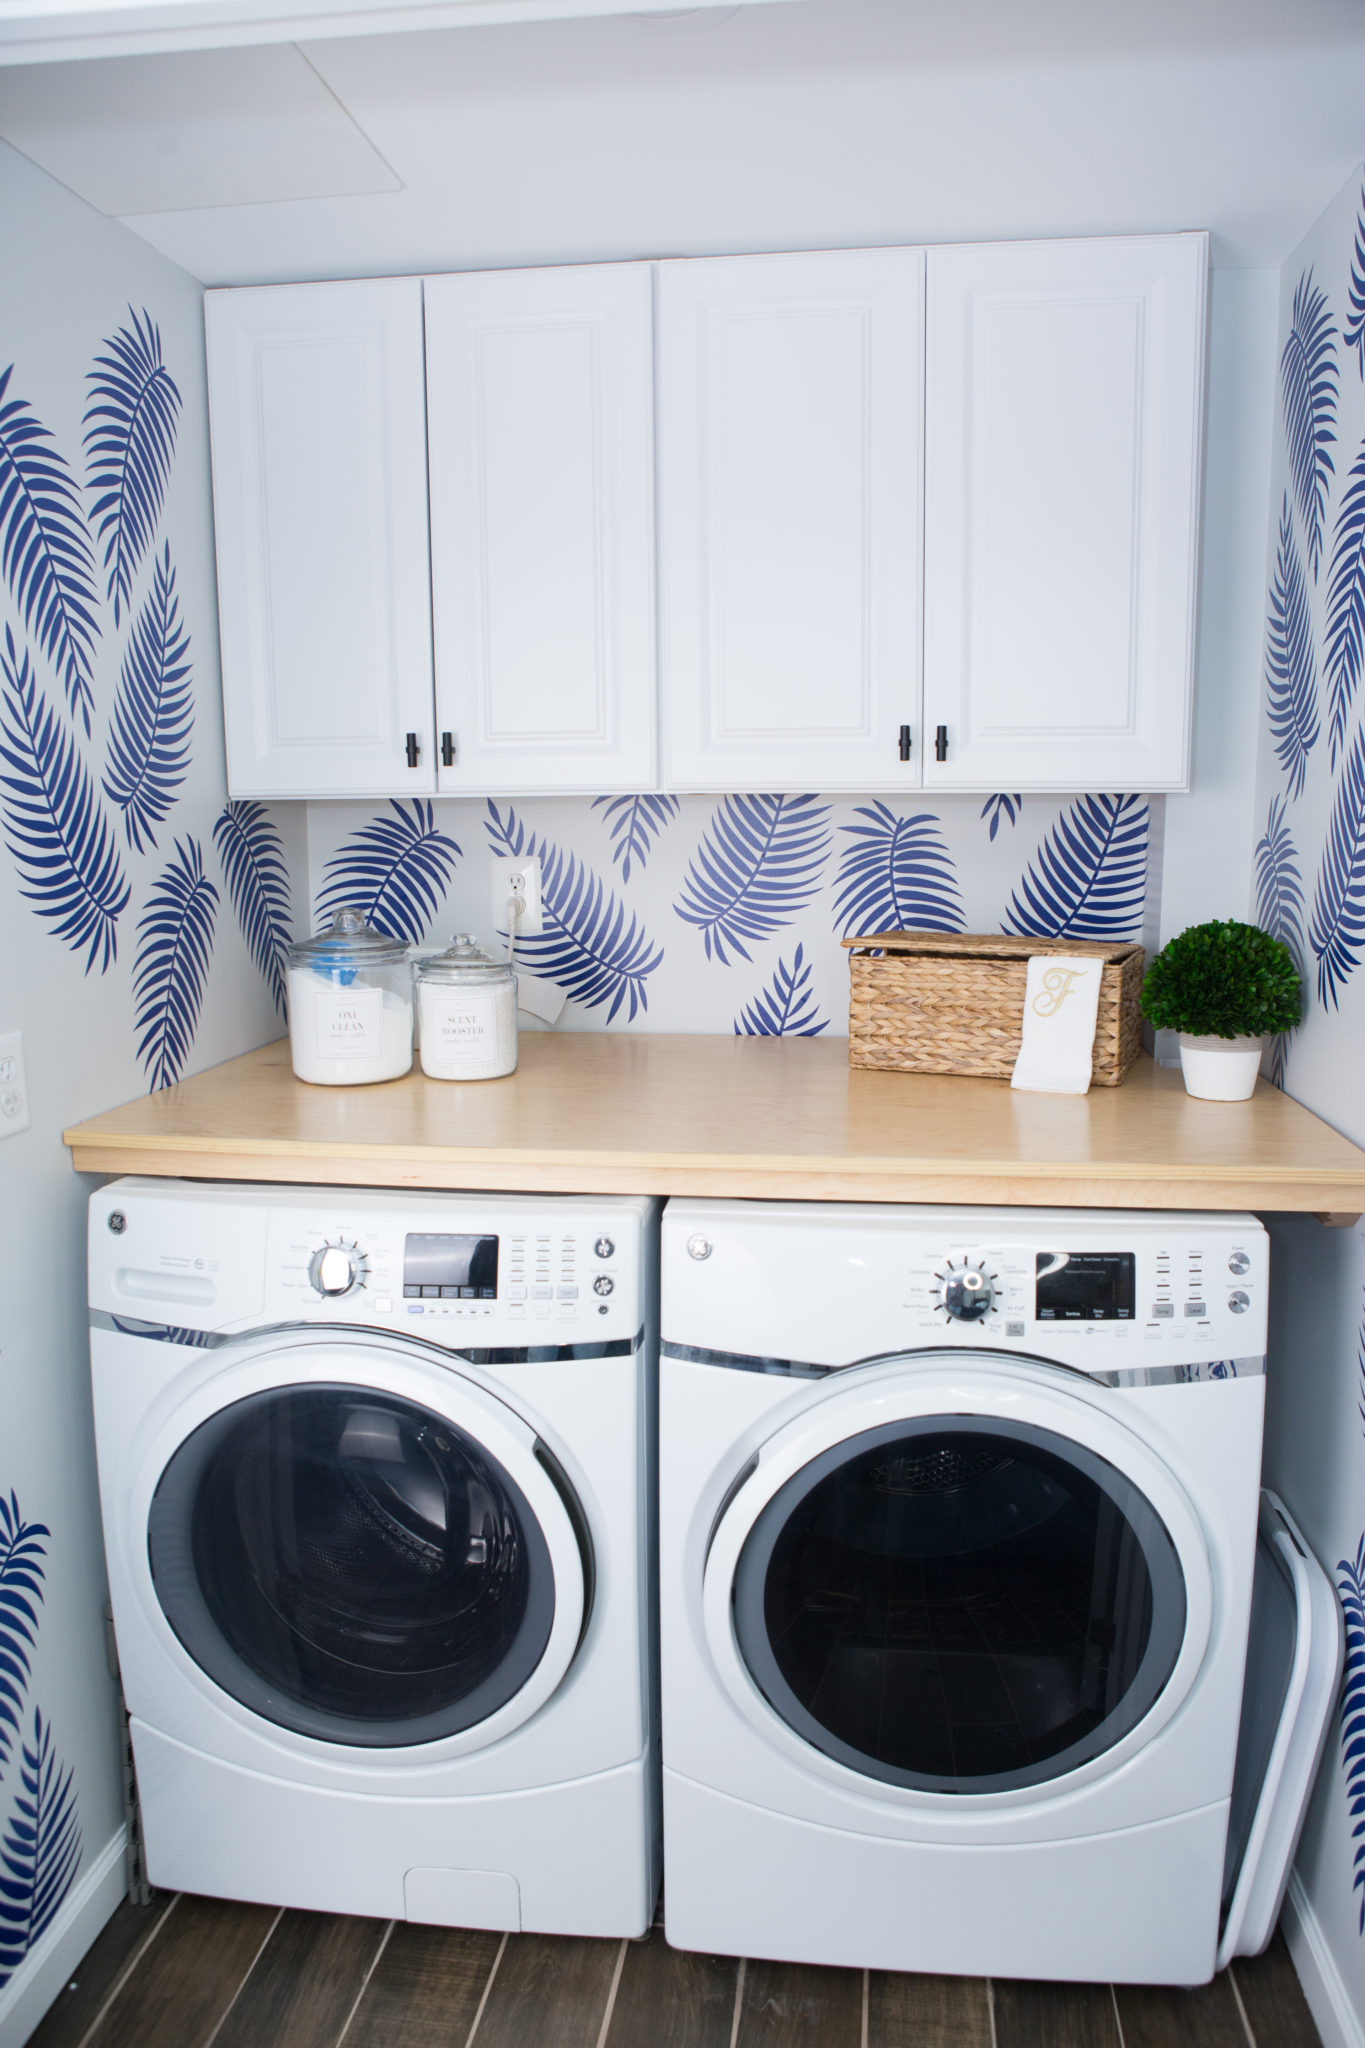 How to Organize A Small Laundry Room - diybynikyfoster.com